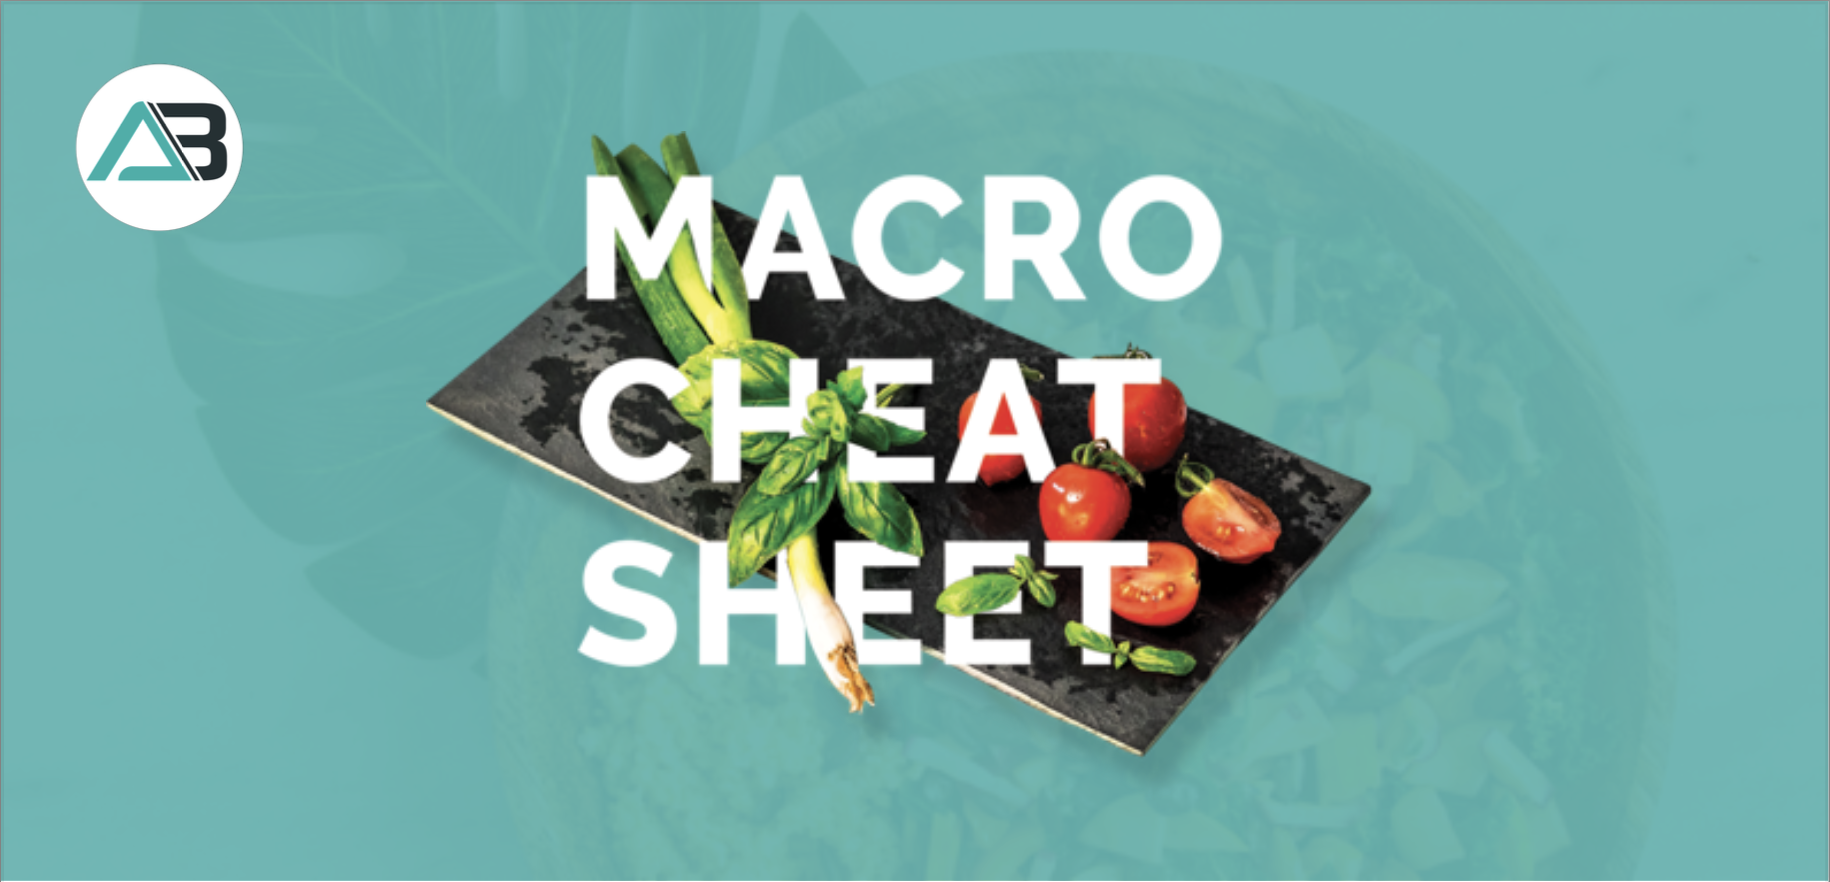 Macro Cheat Sheet front cover | Featured Image for Recipe Packs page by AB Fitness Hub.